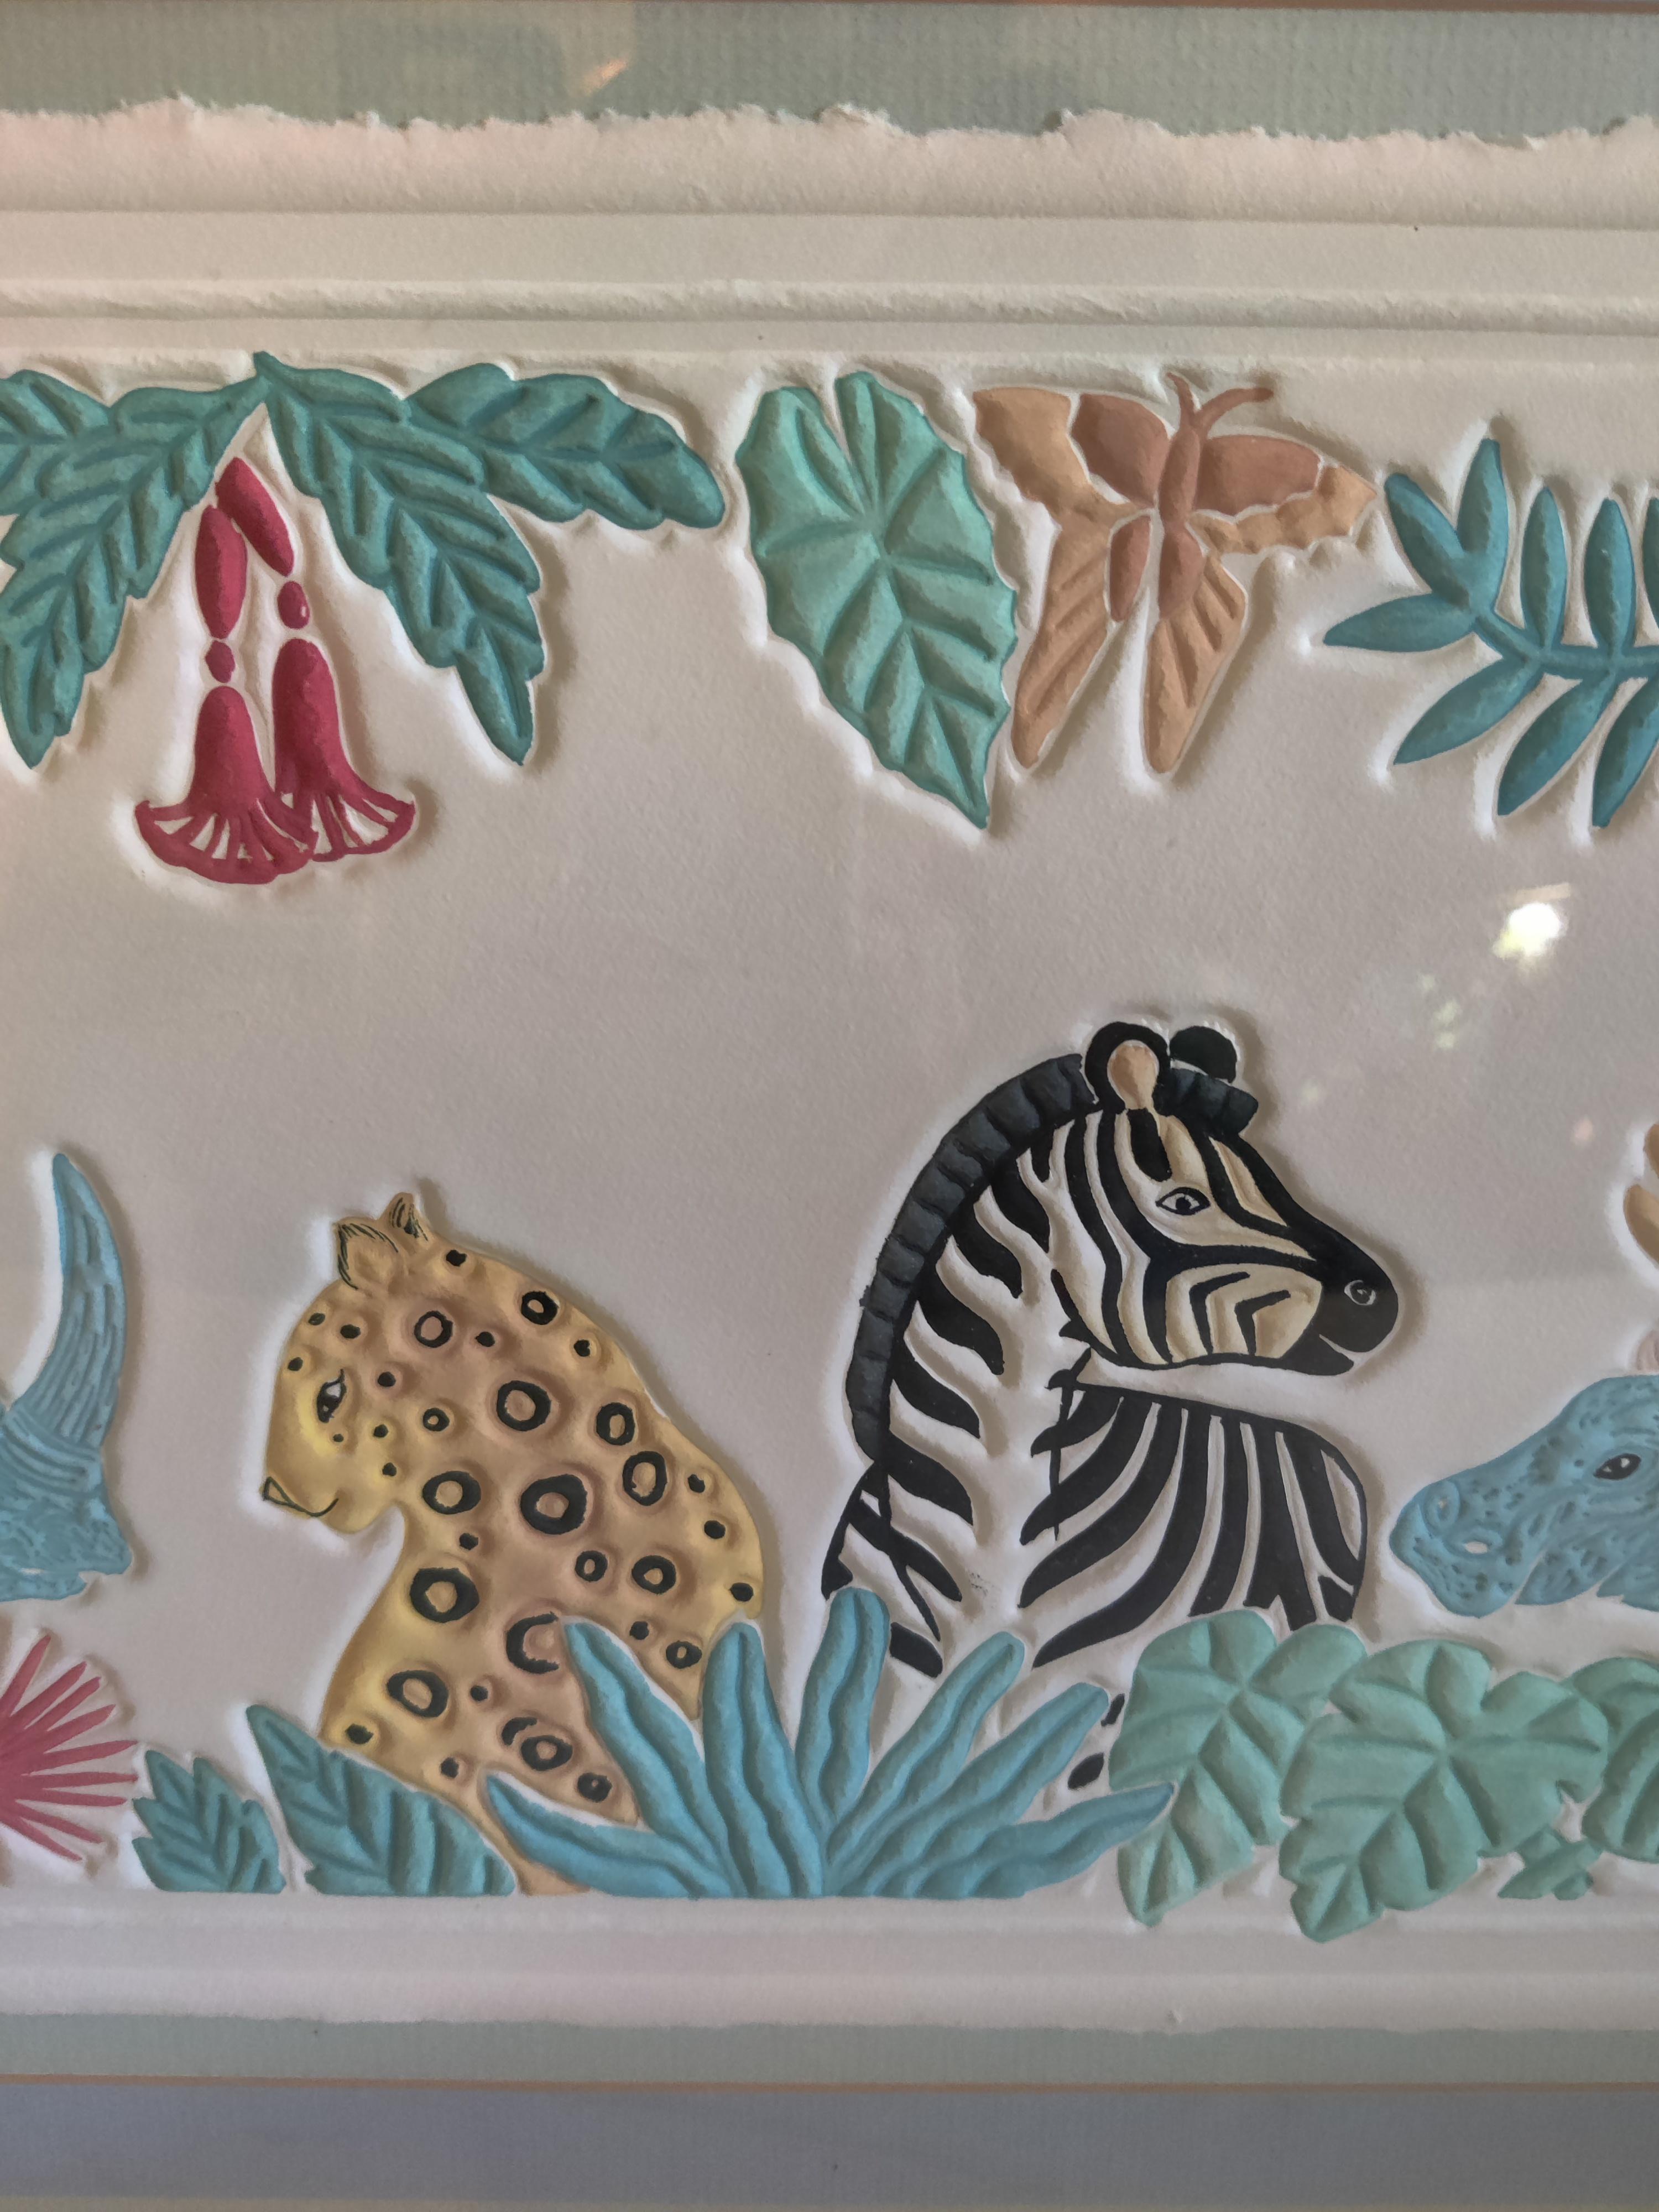 Jungle Beat Embossed framed limited edition 72/250 by artist Jane Billman
Image dimensions 28.5 W x 10.5 H